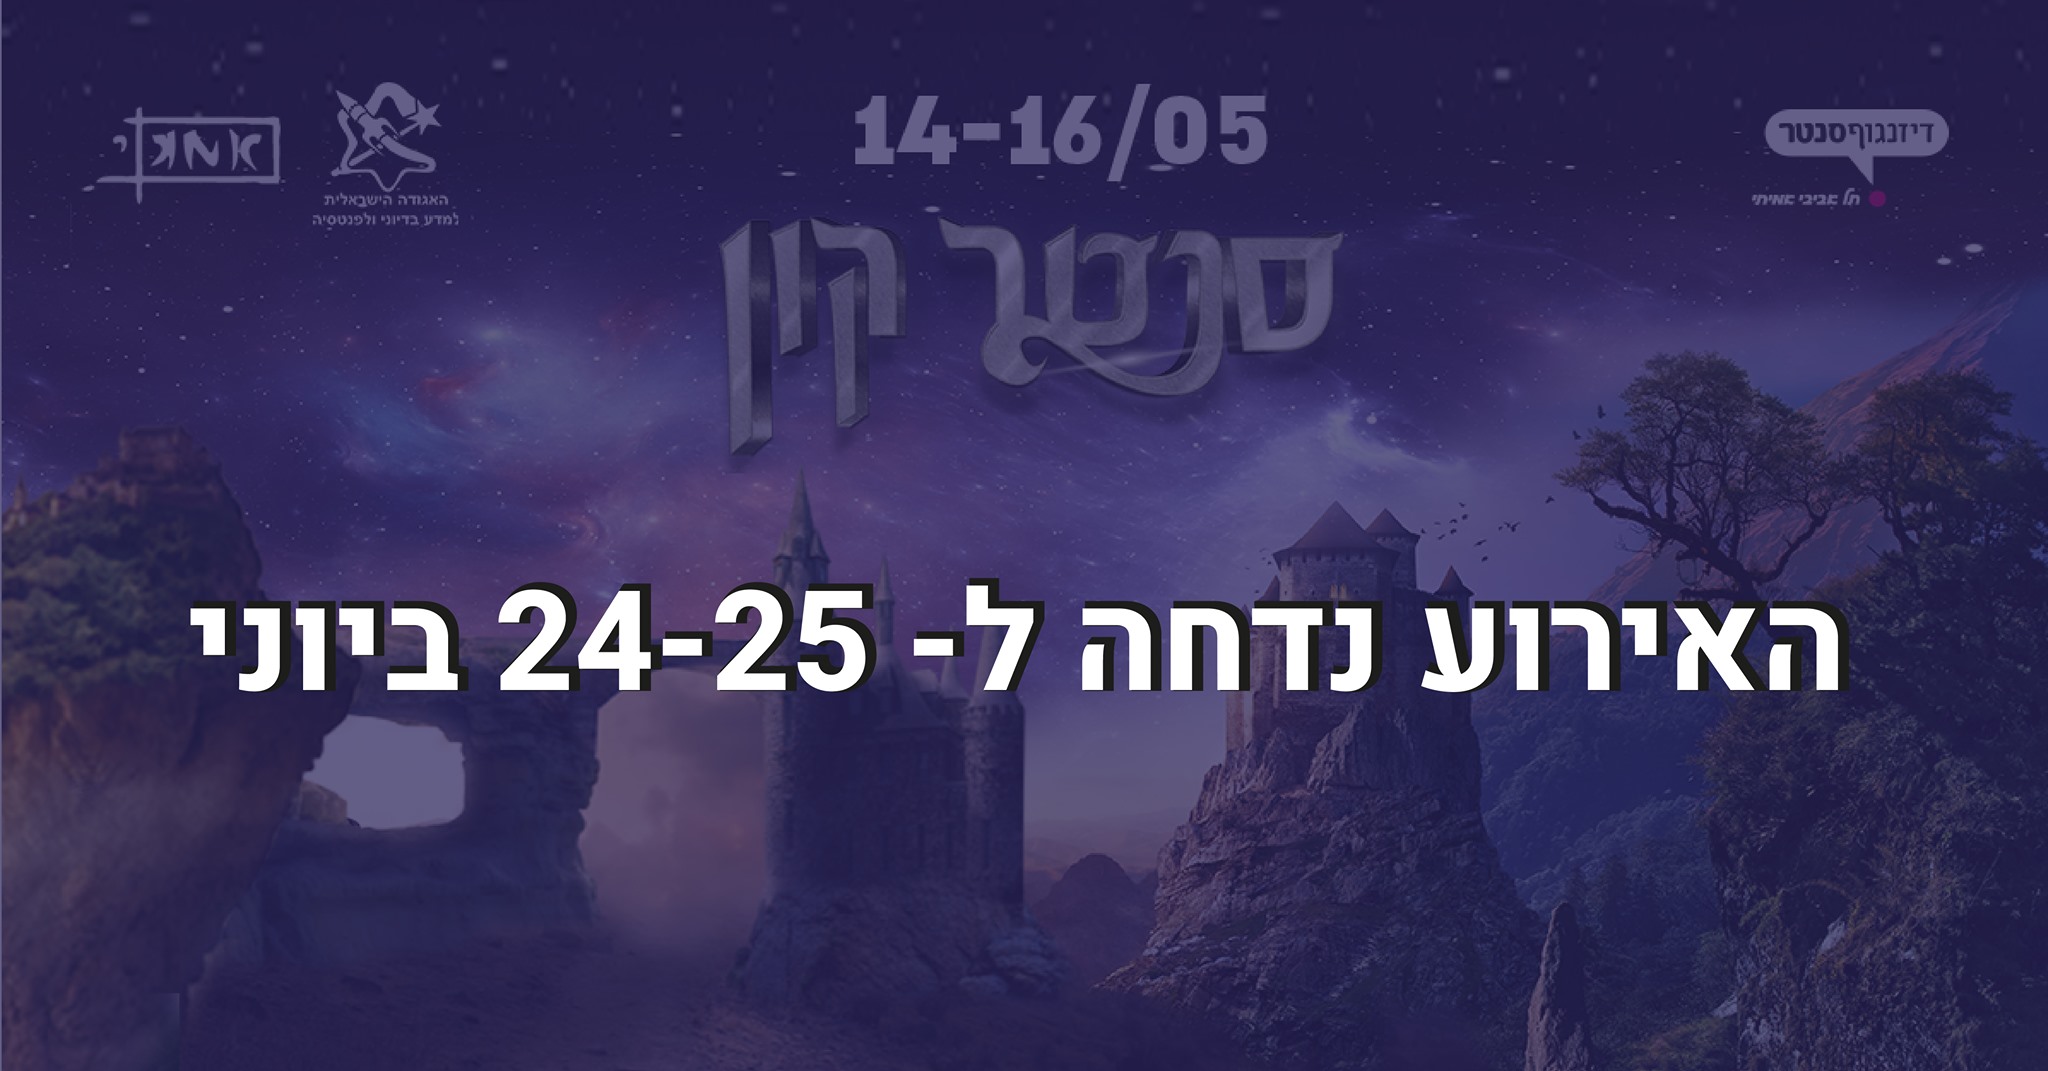 Comic Fair at Dizengoff Center | The event was postponed to June 24-25